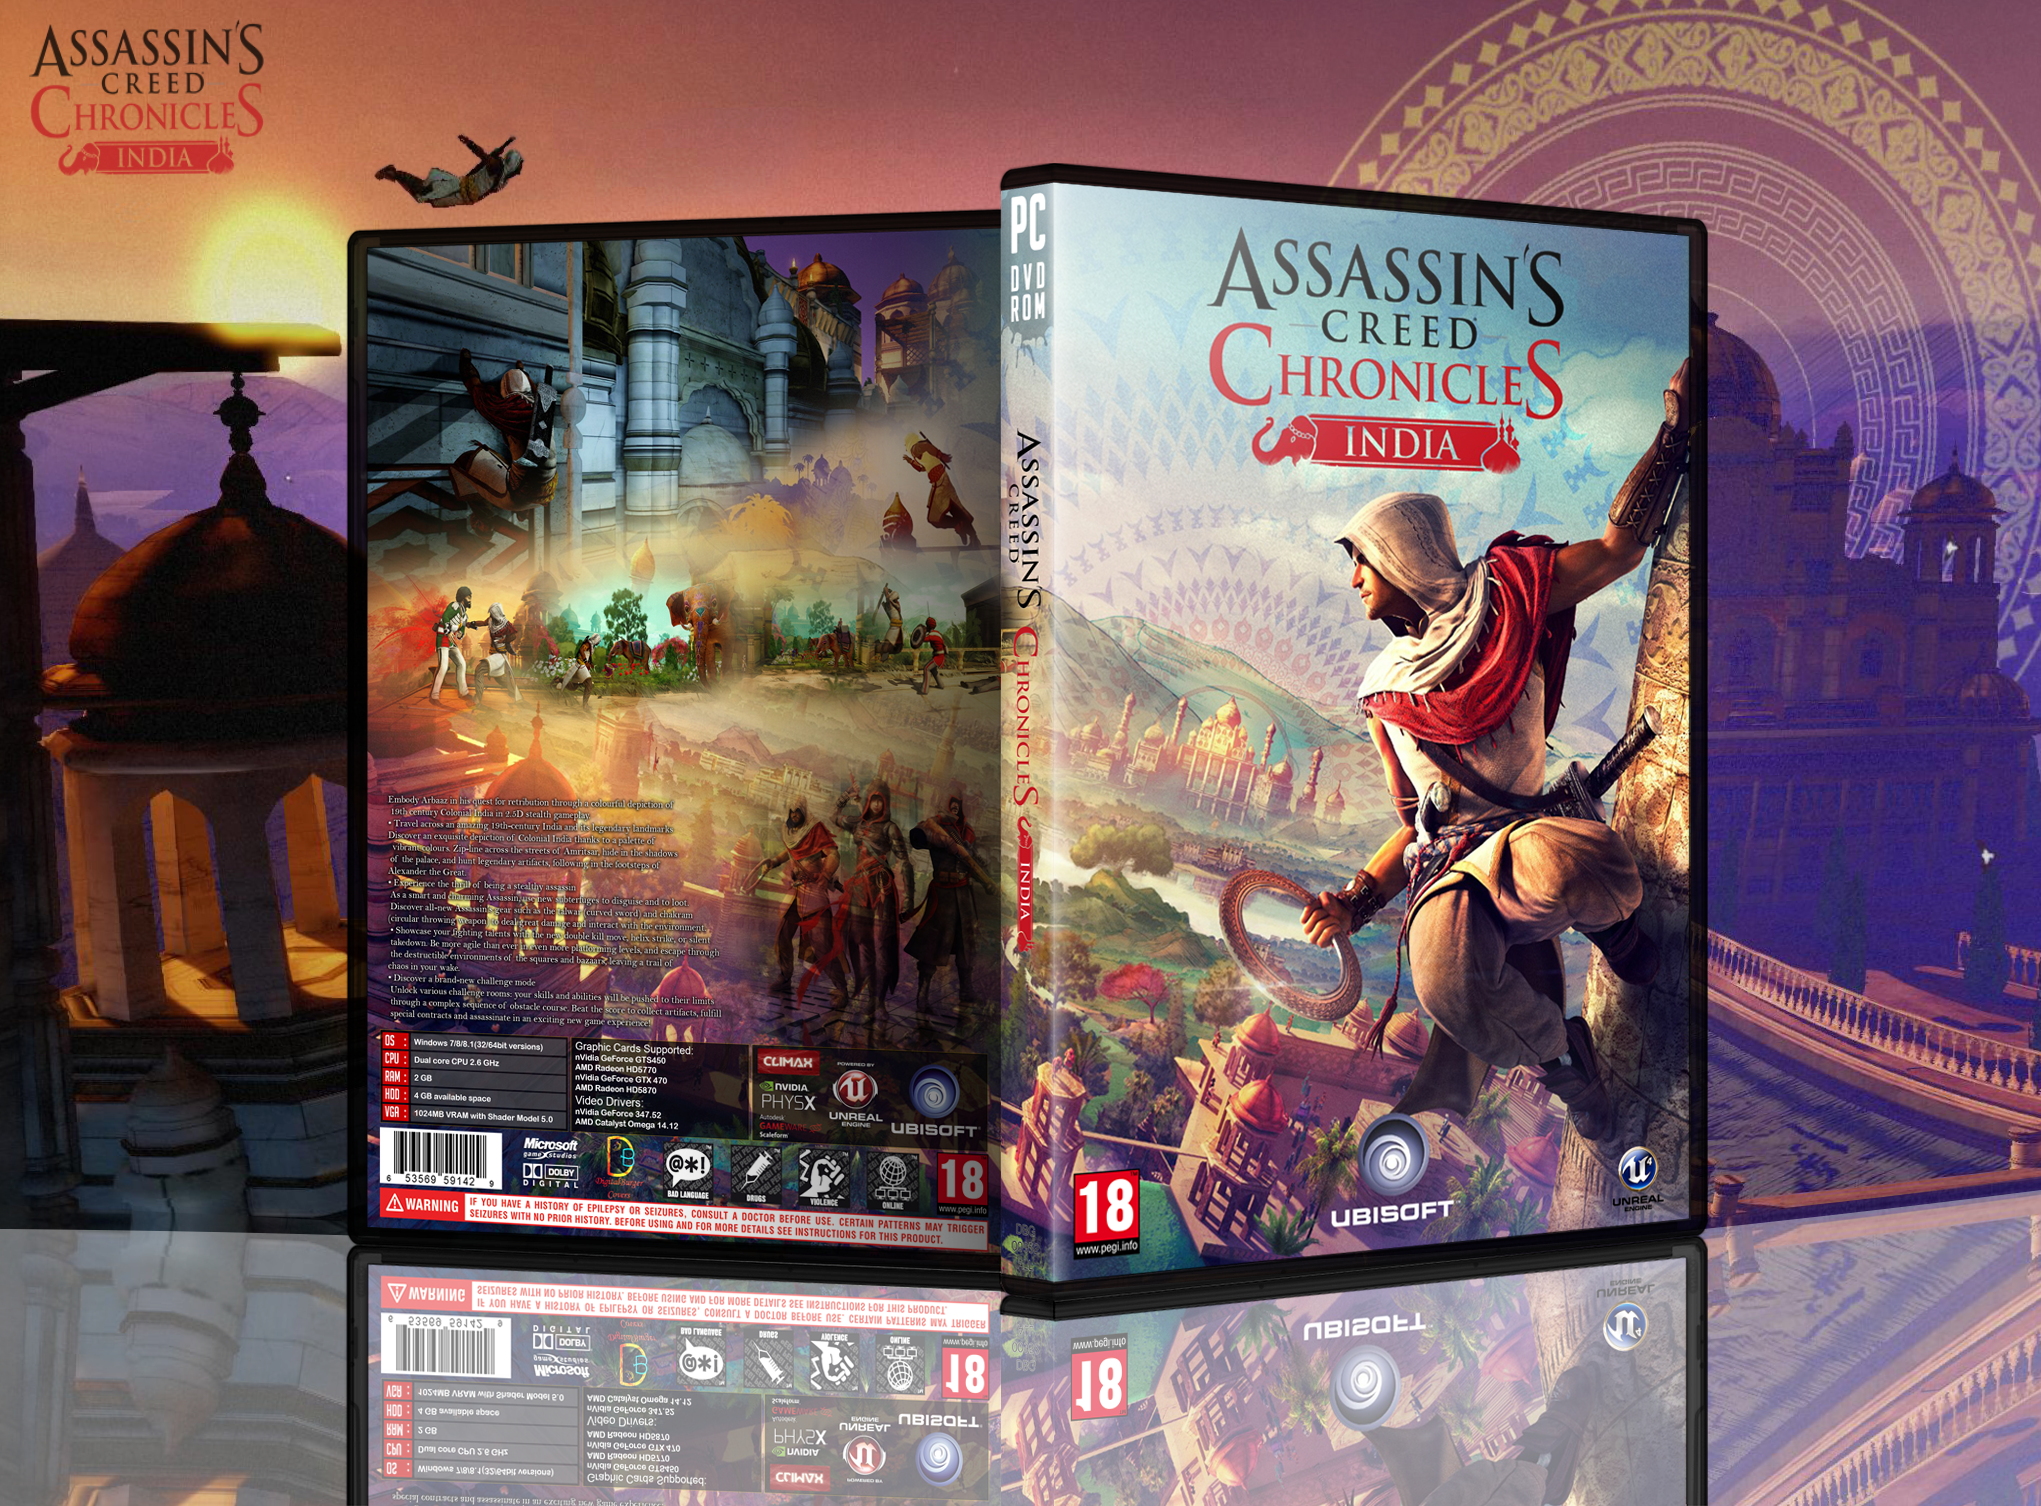 Assassin's Creed Chronicles India box cover